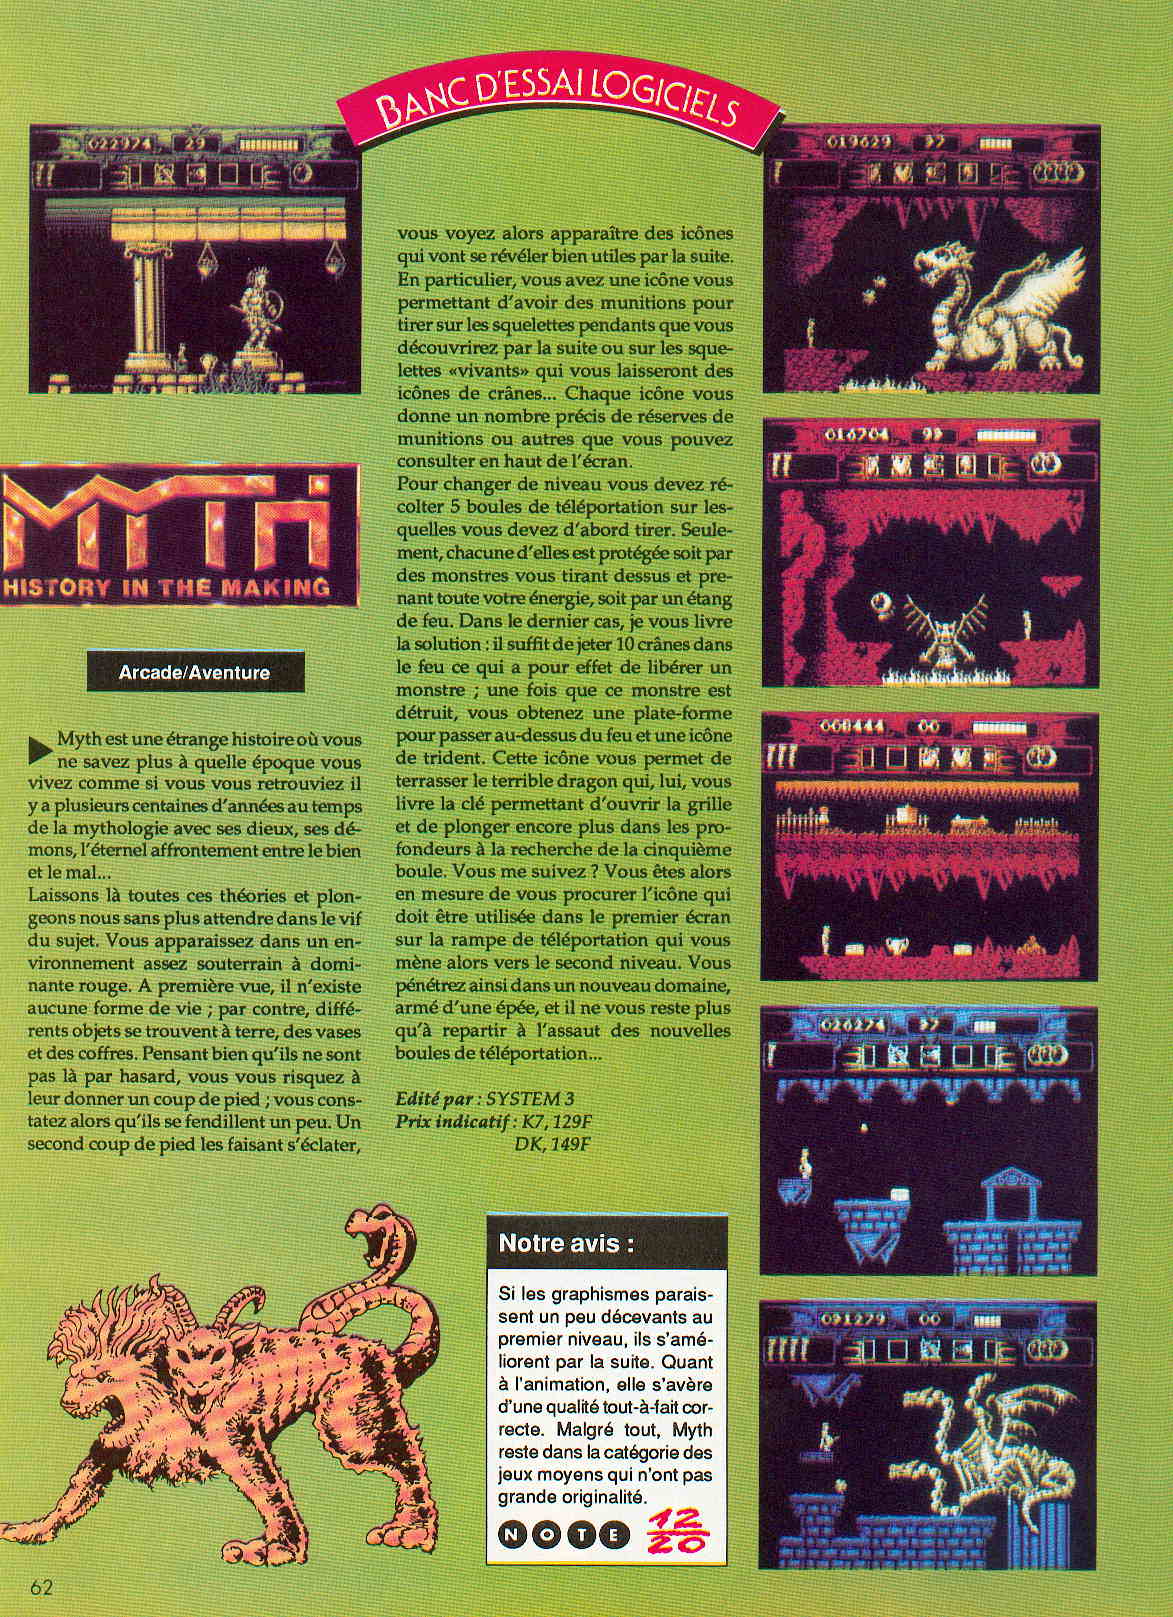 Old But Gold #7 - Myth 2